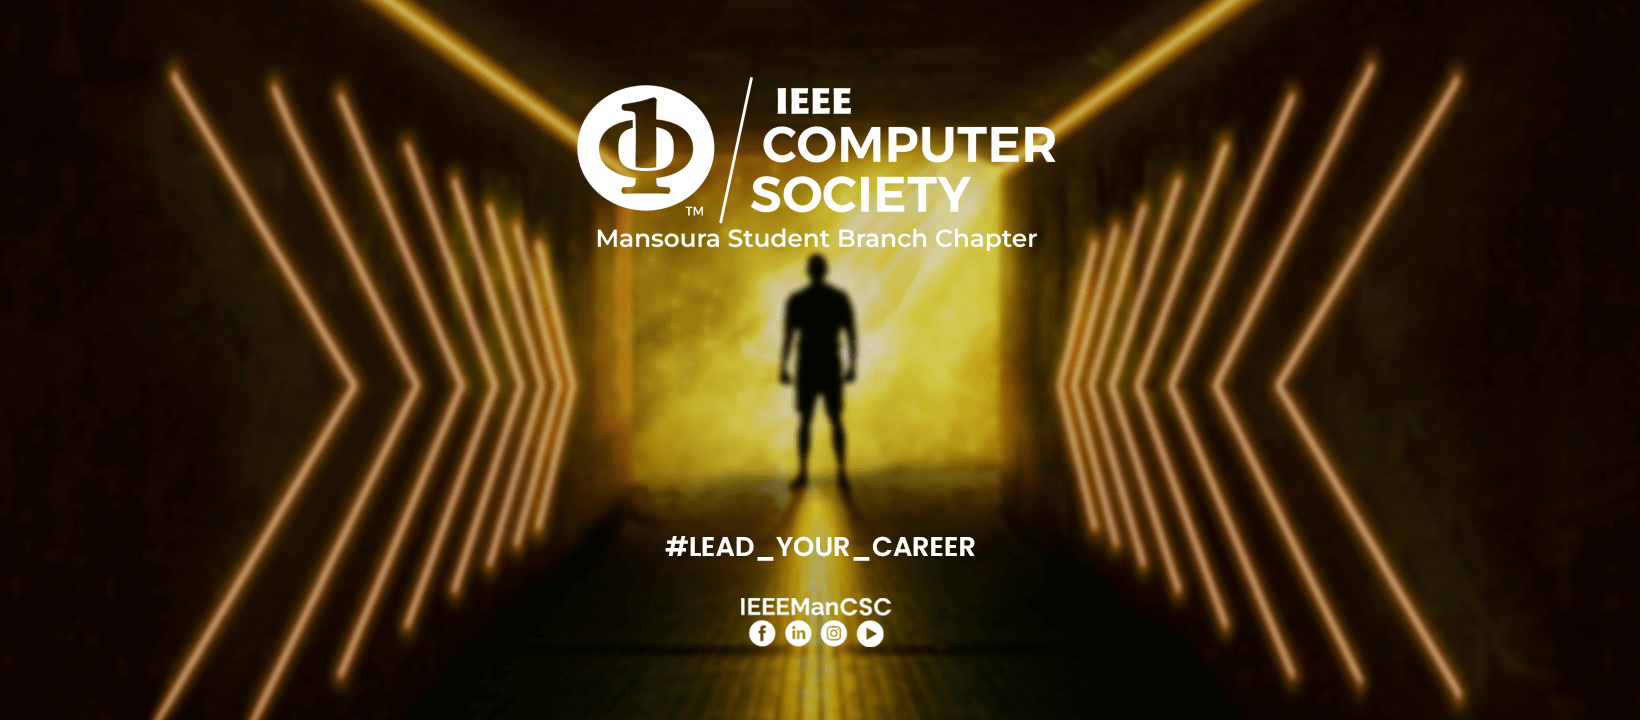 IEEE Mansoura Computer Society Chapter